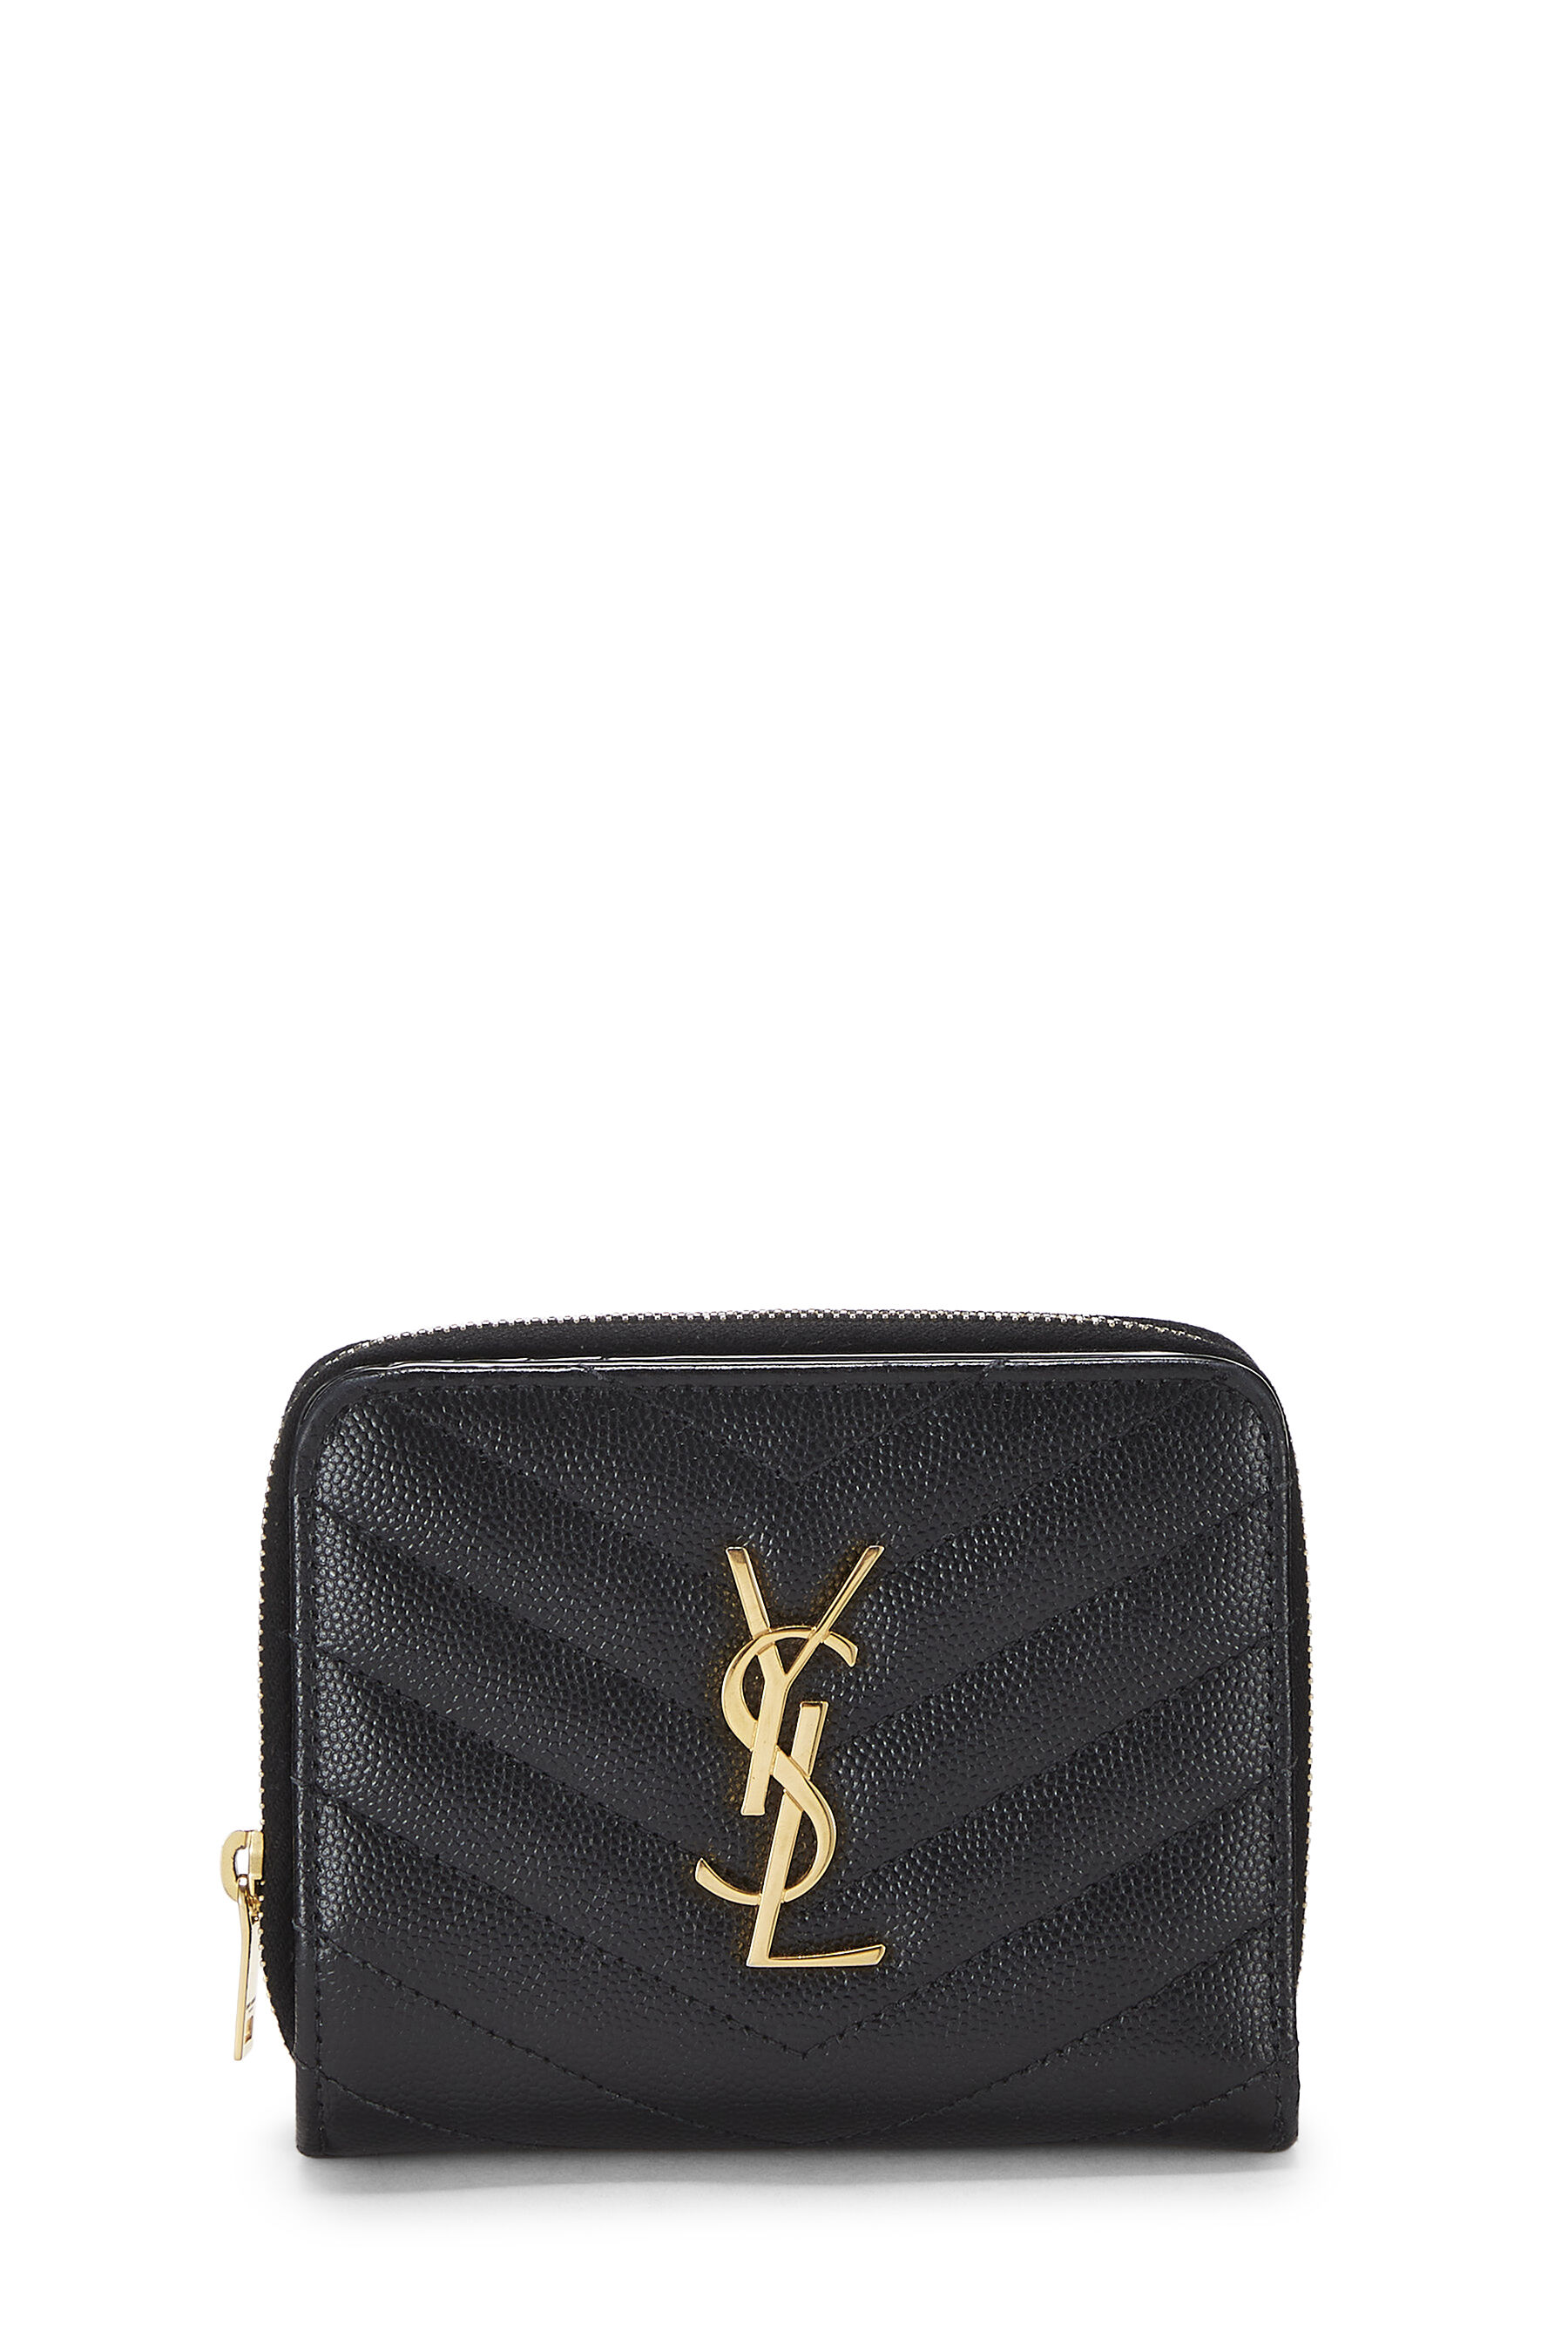 YSL Black Grainy Leather Compact Wallet